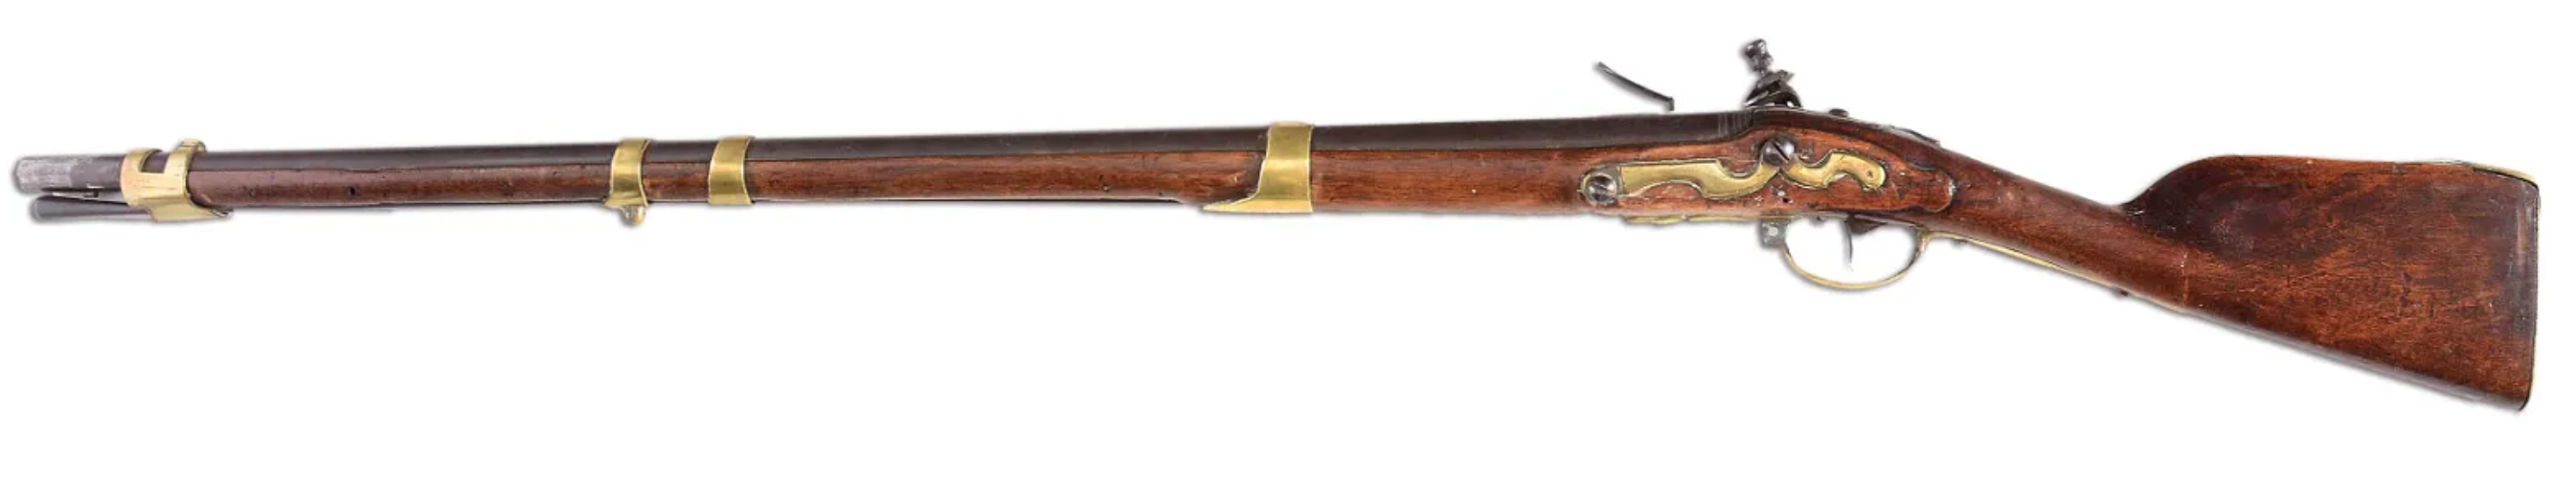 A documented Dutch flintlock musket carried by a Colonial soldier during the Revolutionary War achieved $400,000 plus the buyer’s premium in October 2019. Image courtesy of Dan Morphy Auctions and LiveAuctioneers.